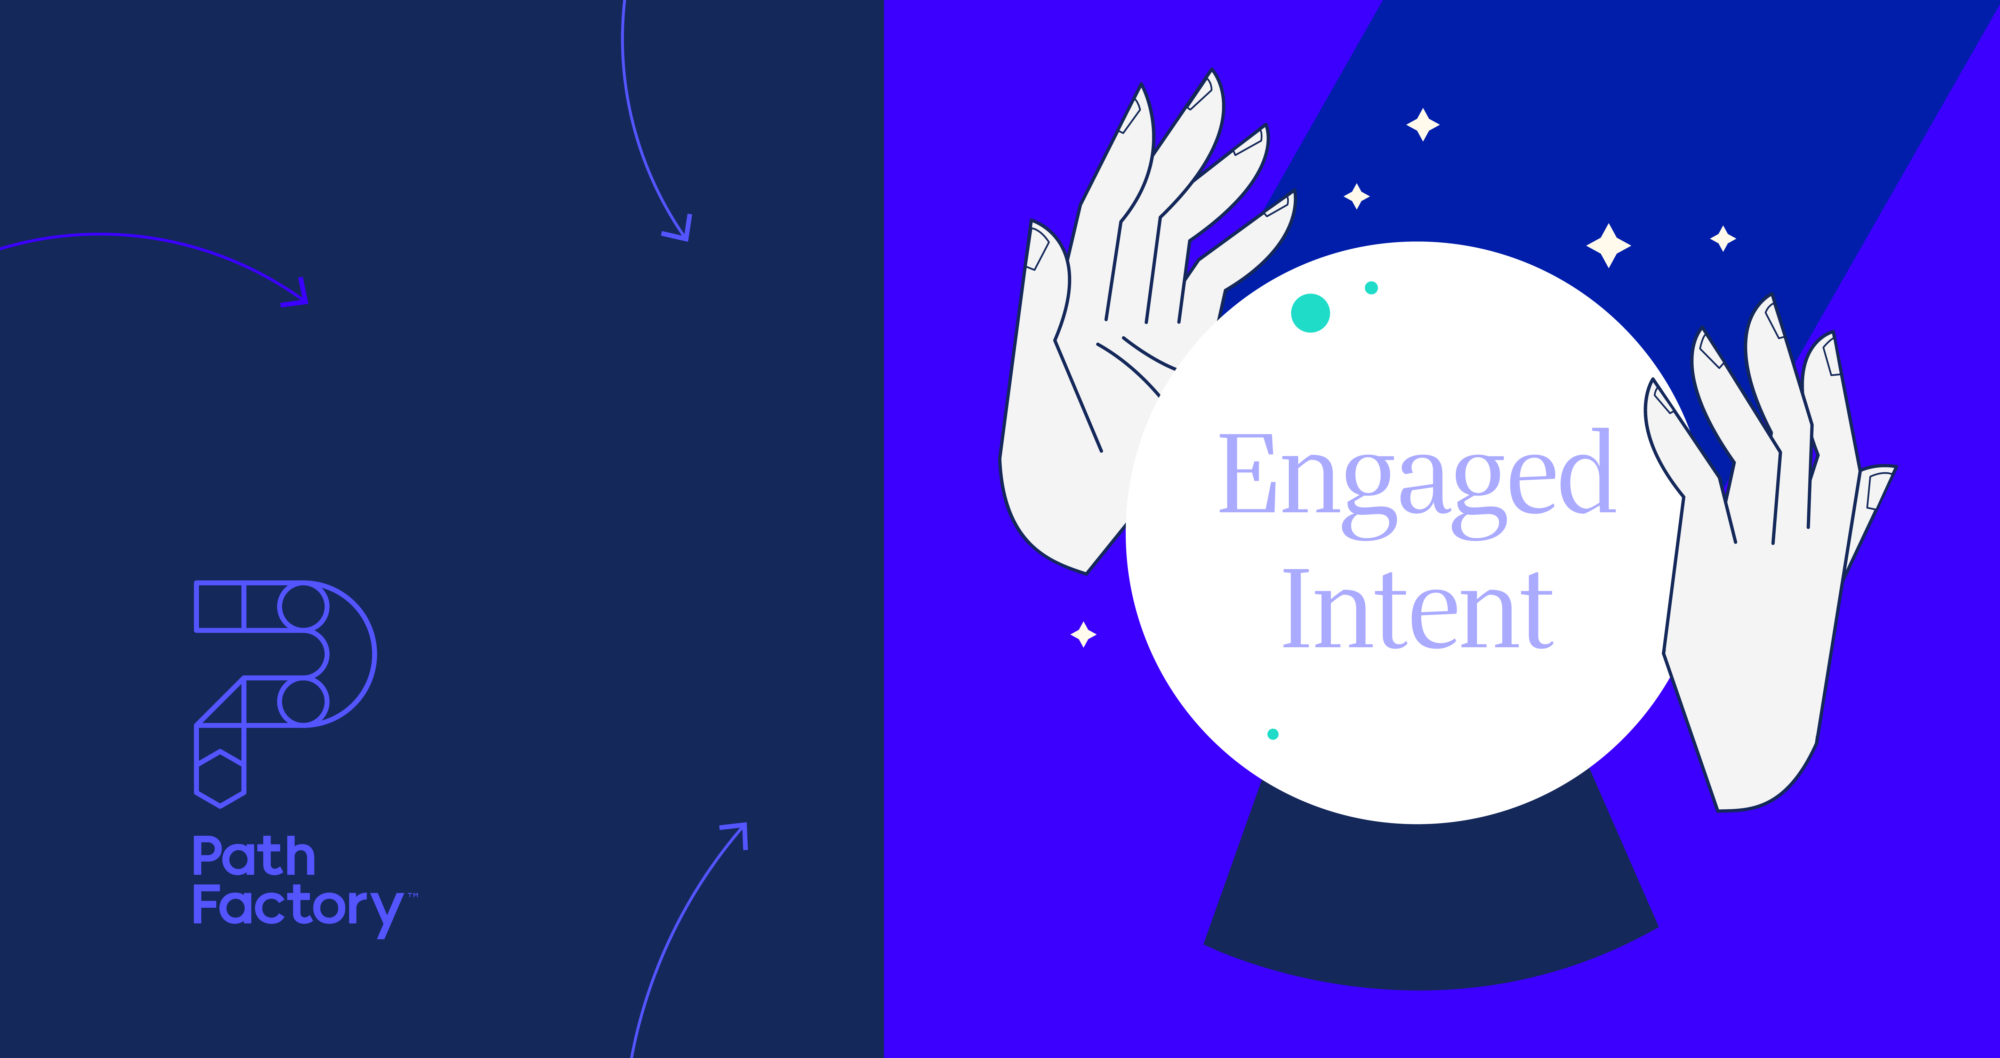 Image - Crystal ball with "Engaged Intent" written inside. On blue background with PathFactory logo on left bottom side